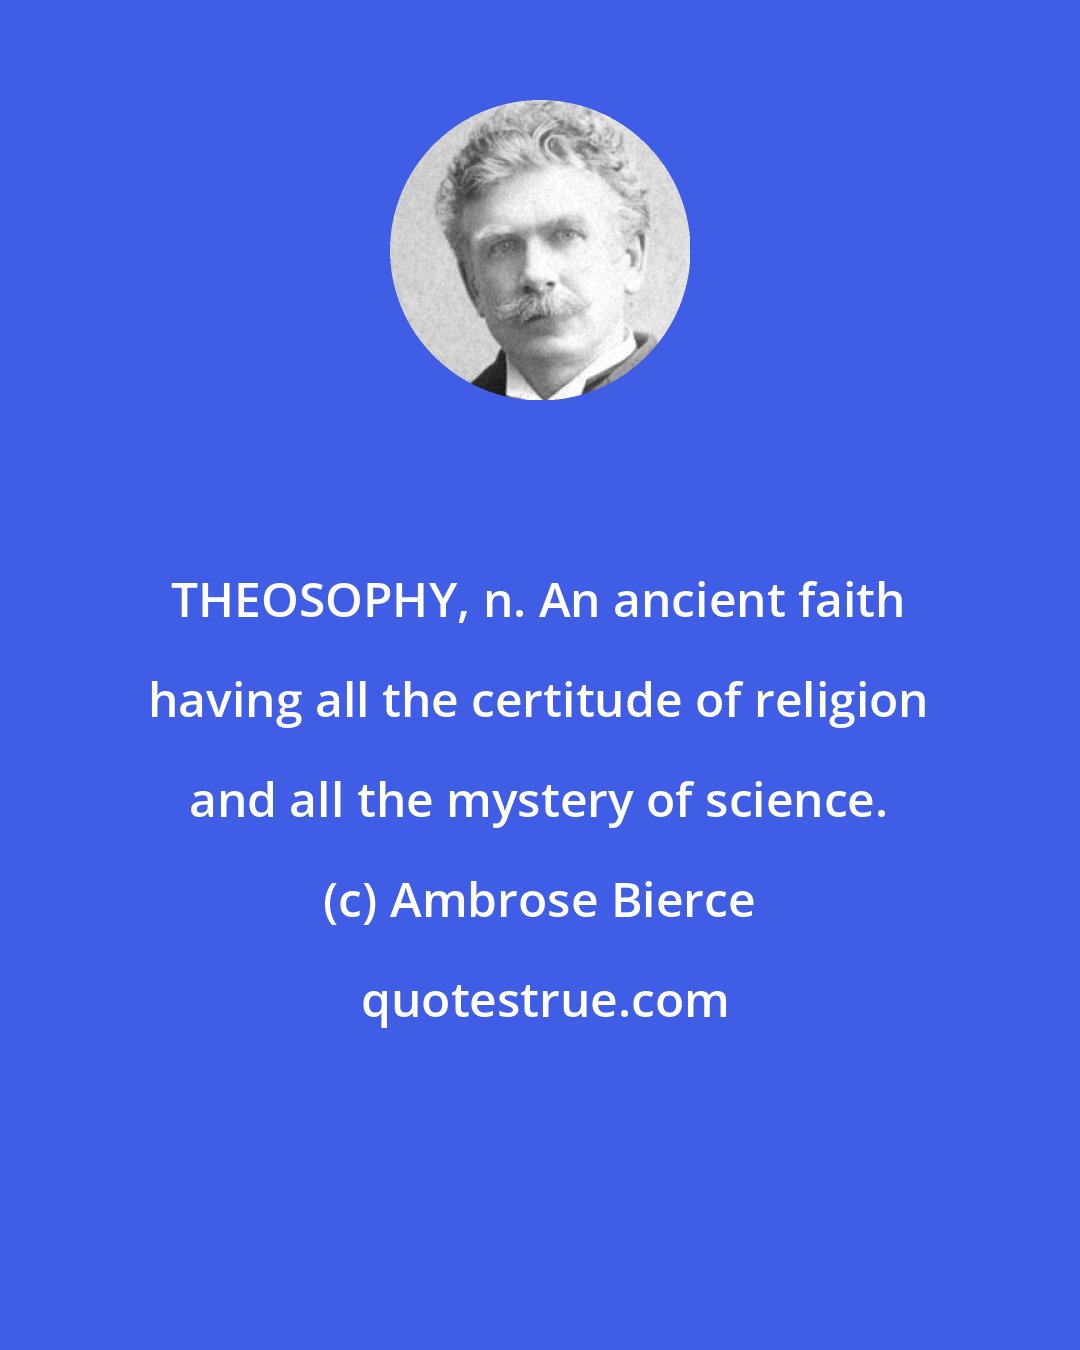 Ambrose Bierce: THEOSOPHY, n. An ancient faith having all the certitude of religion and all the mystery of science.